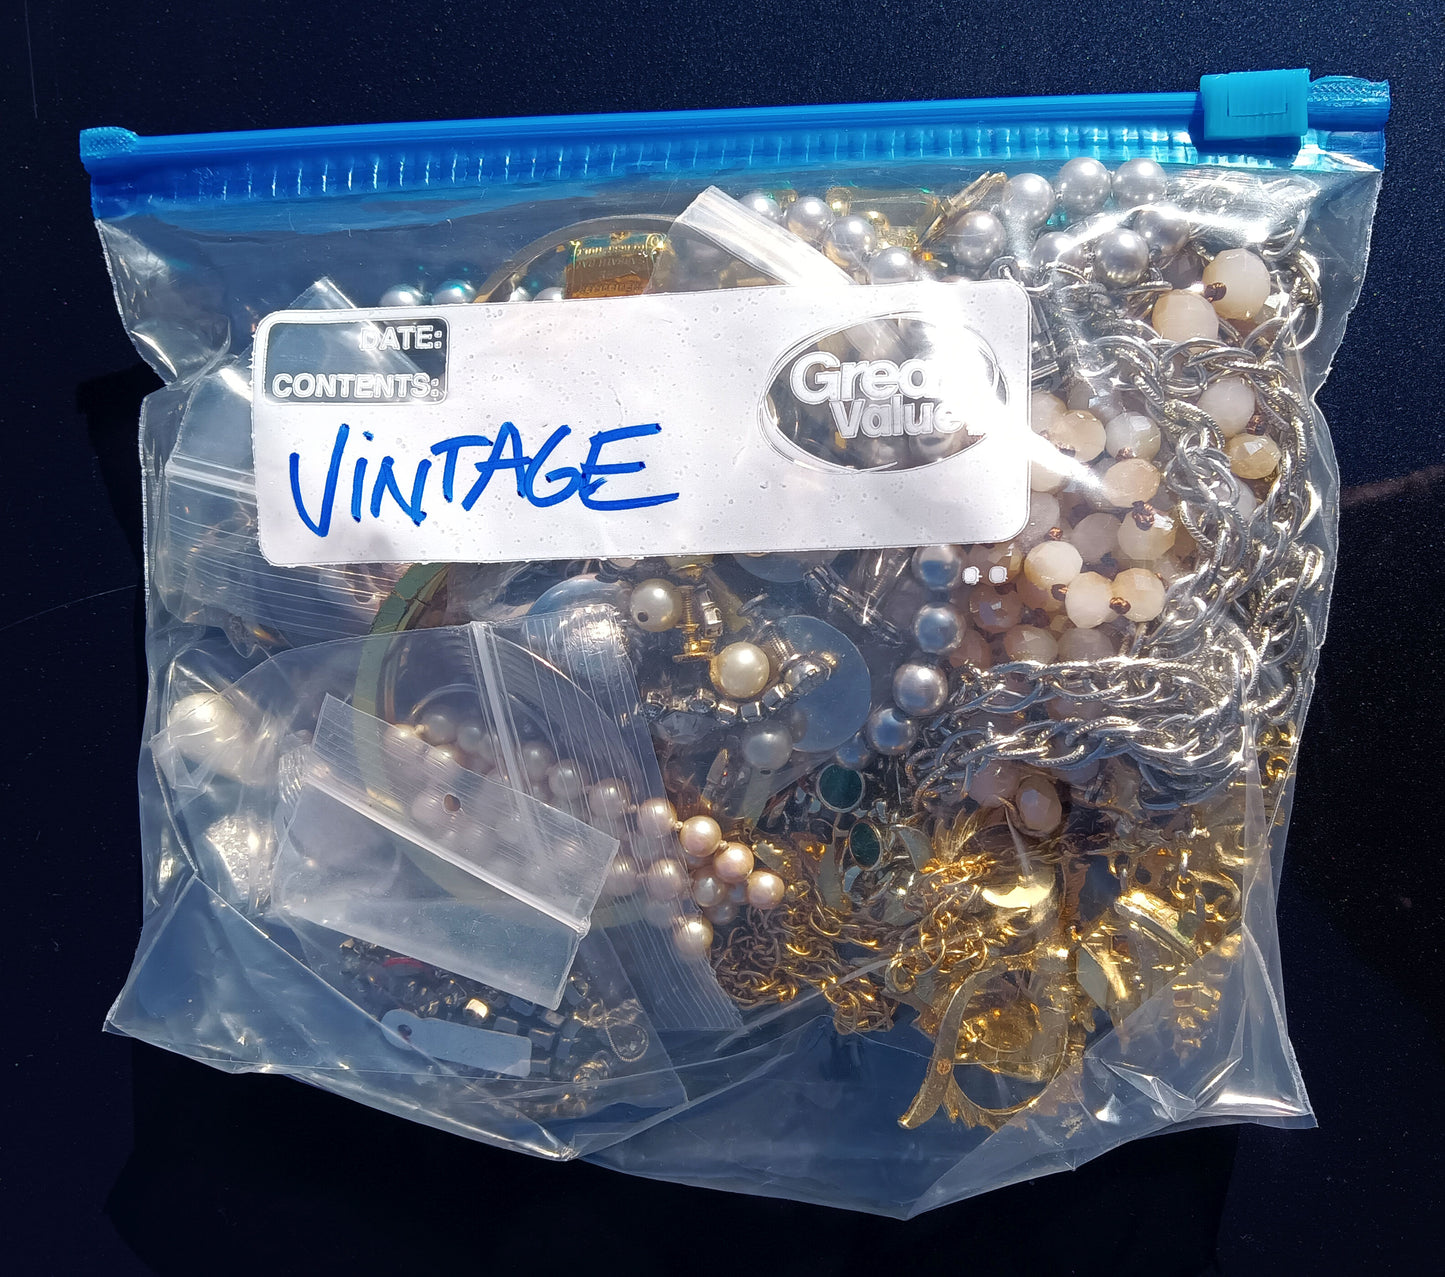 Vintage Costume Jewelry Mystery Bags – 1 pound